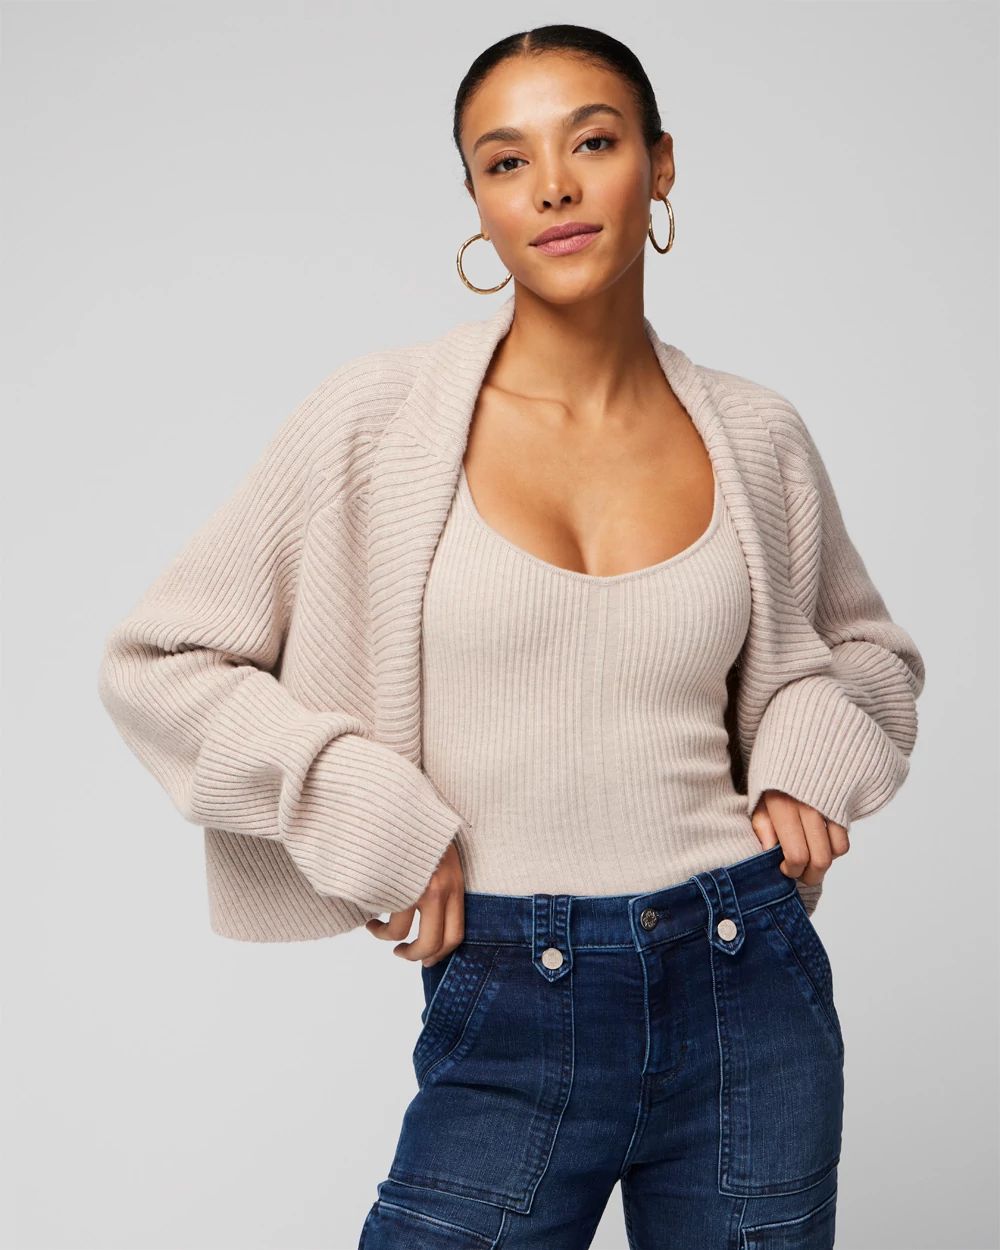 Cashmere Blend Rib Cocoon Sweater click to view larger image.